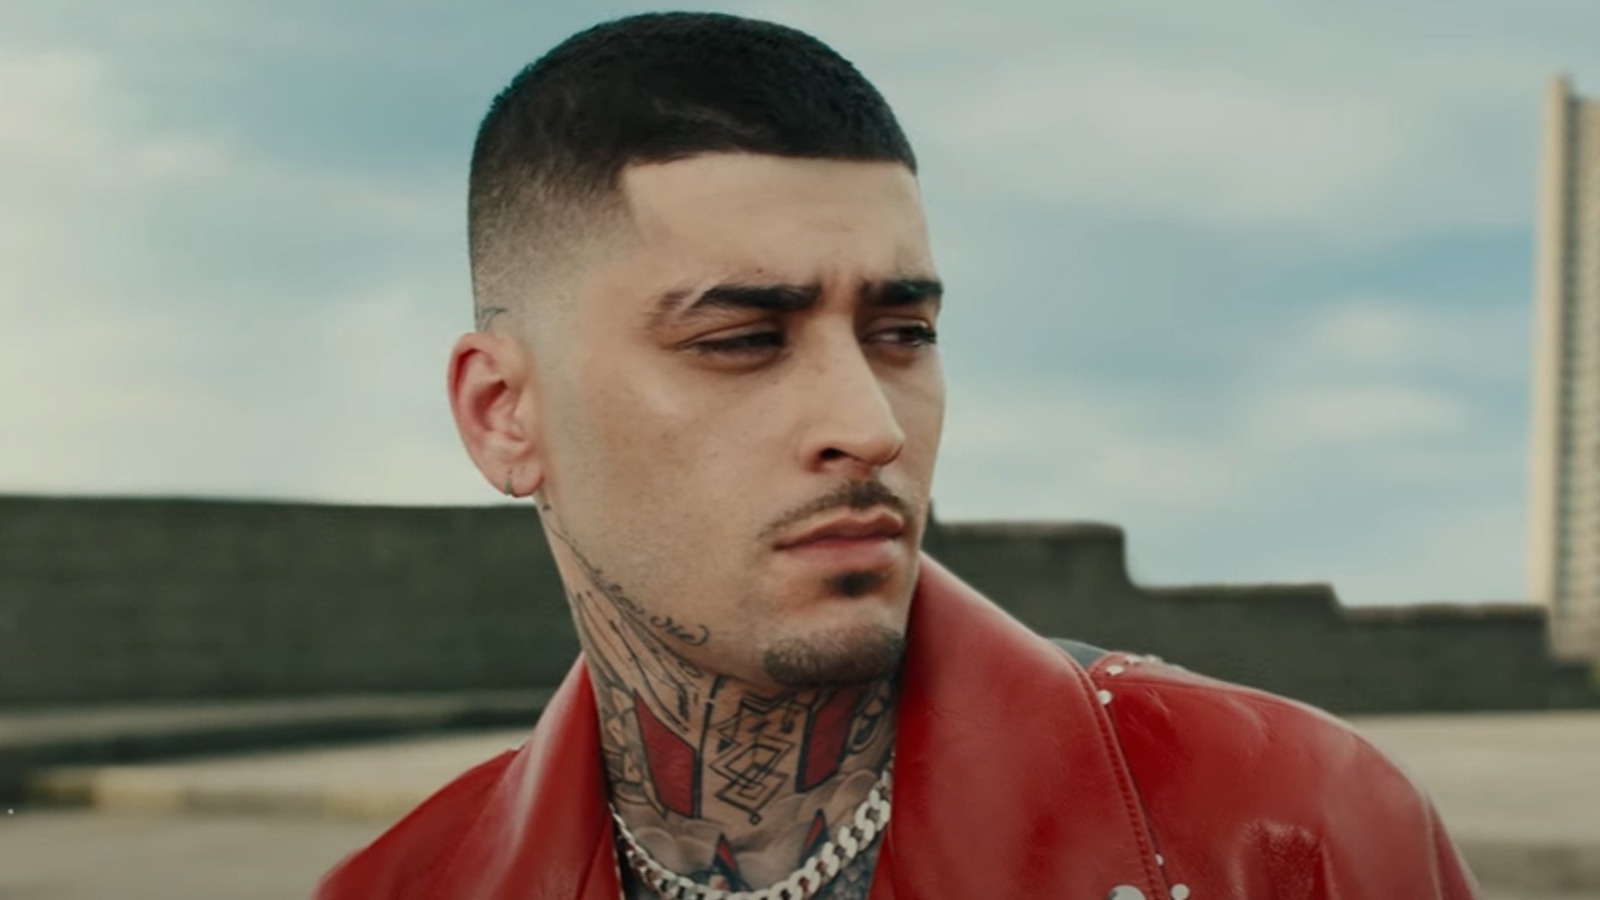 What's The Real Meaning Of Love Like This By Zayn? Here's What We Think